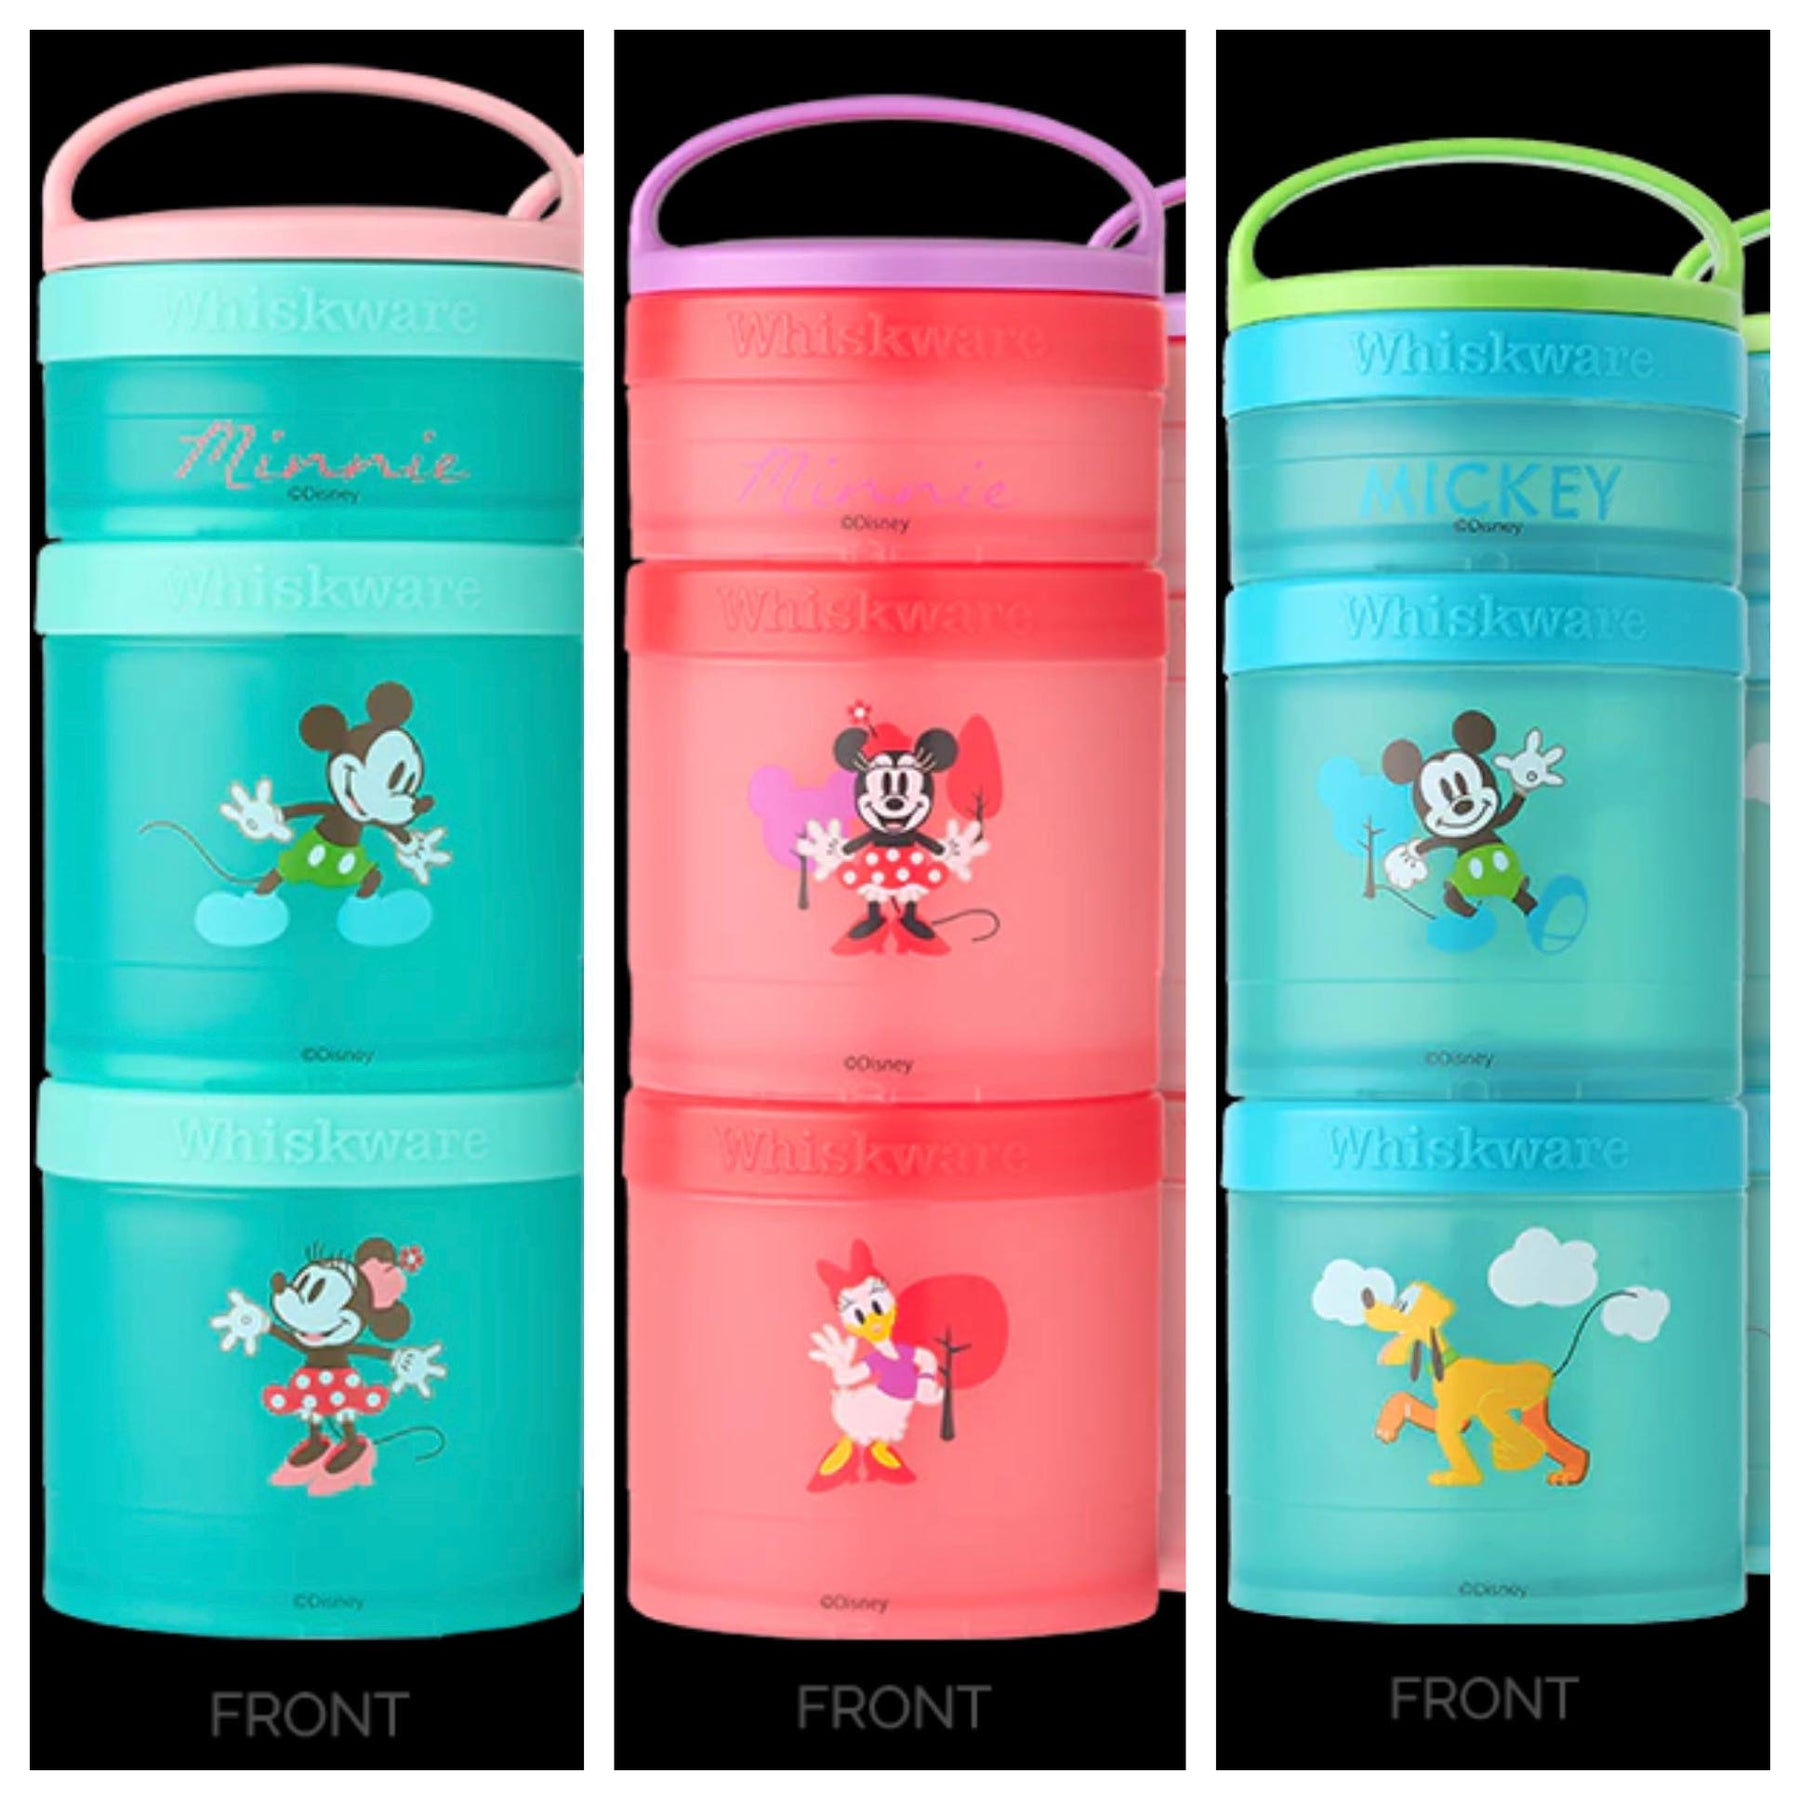 Whiskware Disney Stackable Snack Pack Containers - Mickey & Pluto